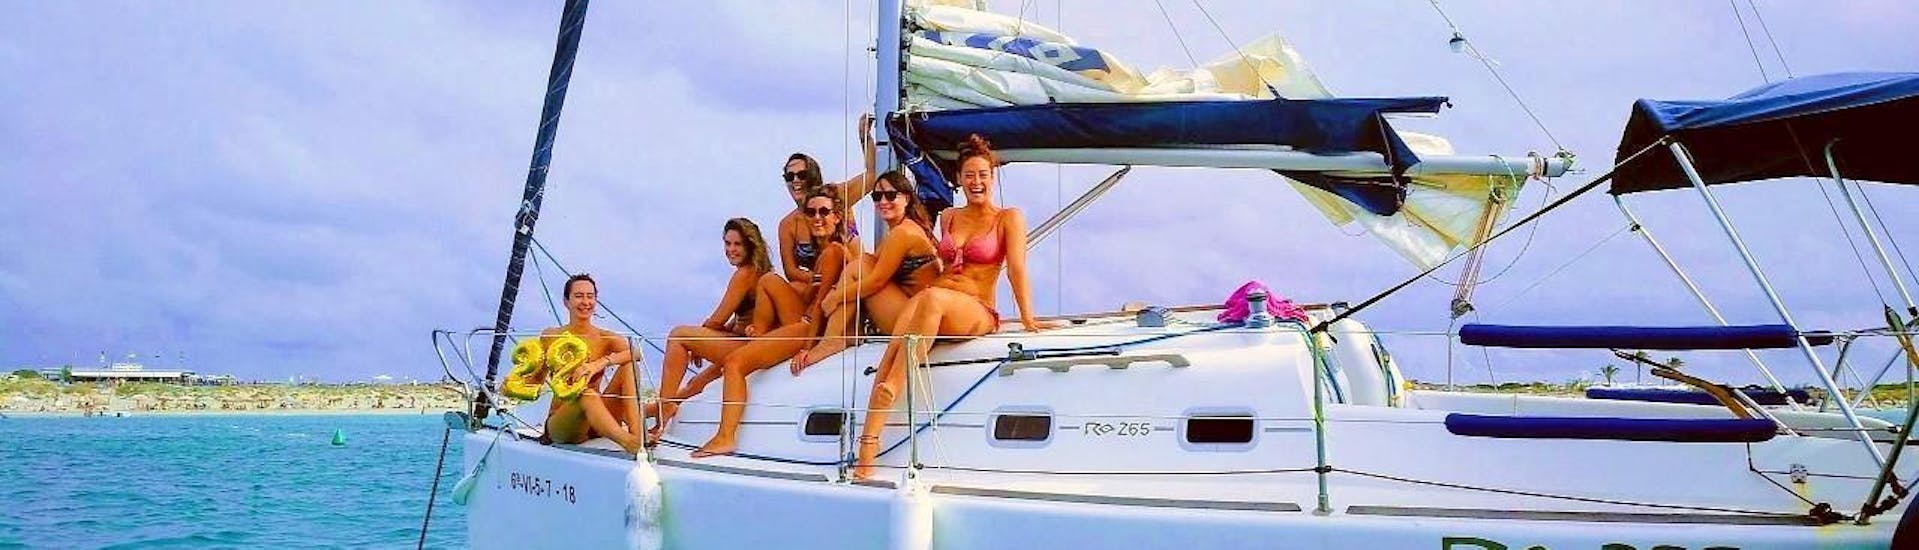 Tour participants relax on the sun deck with Sail in Med during their private boat tour in Alicante.